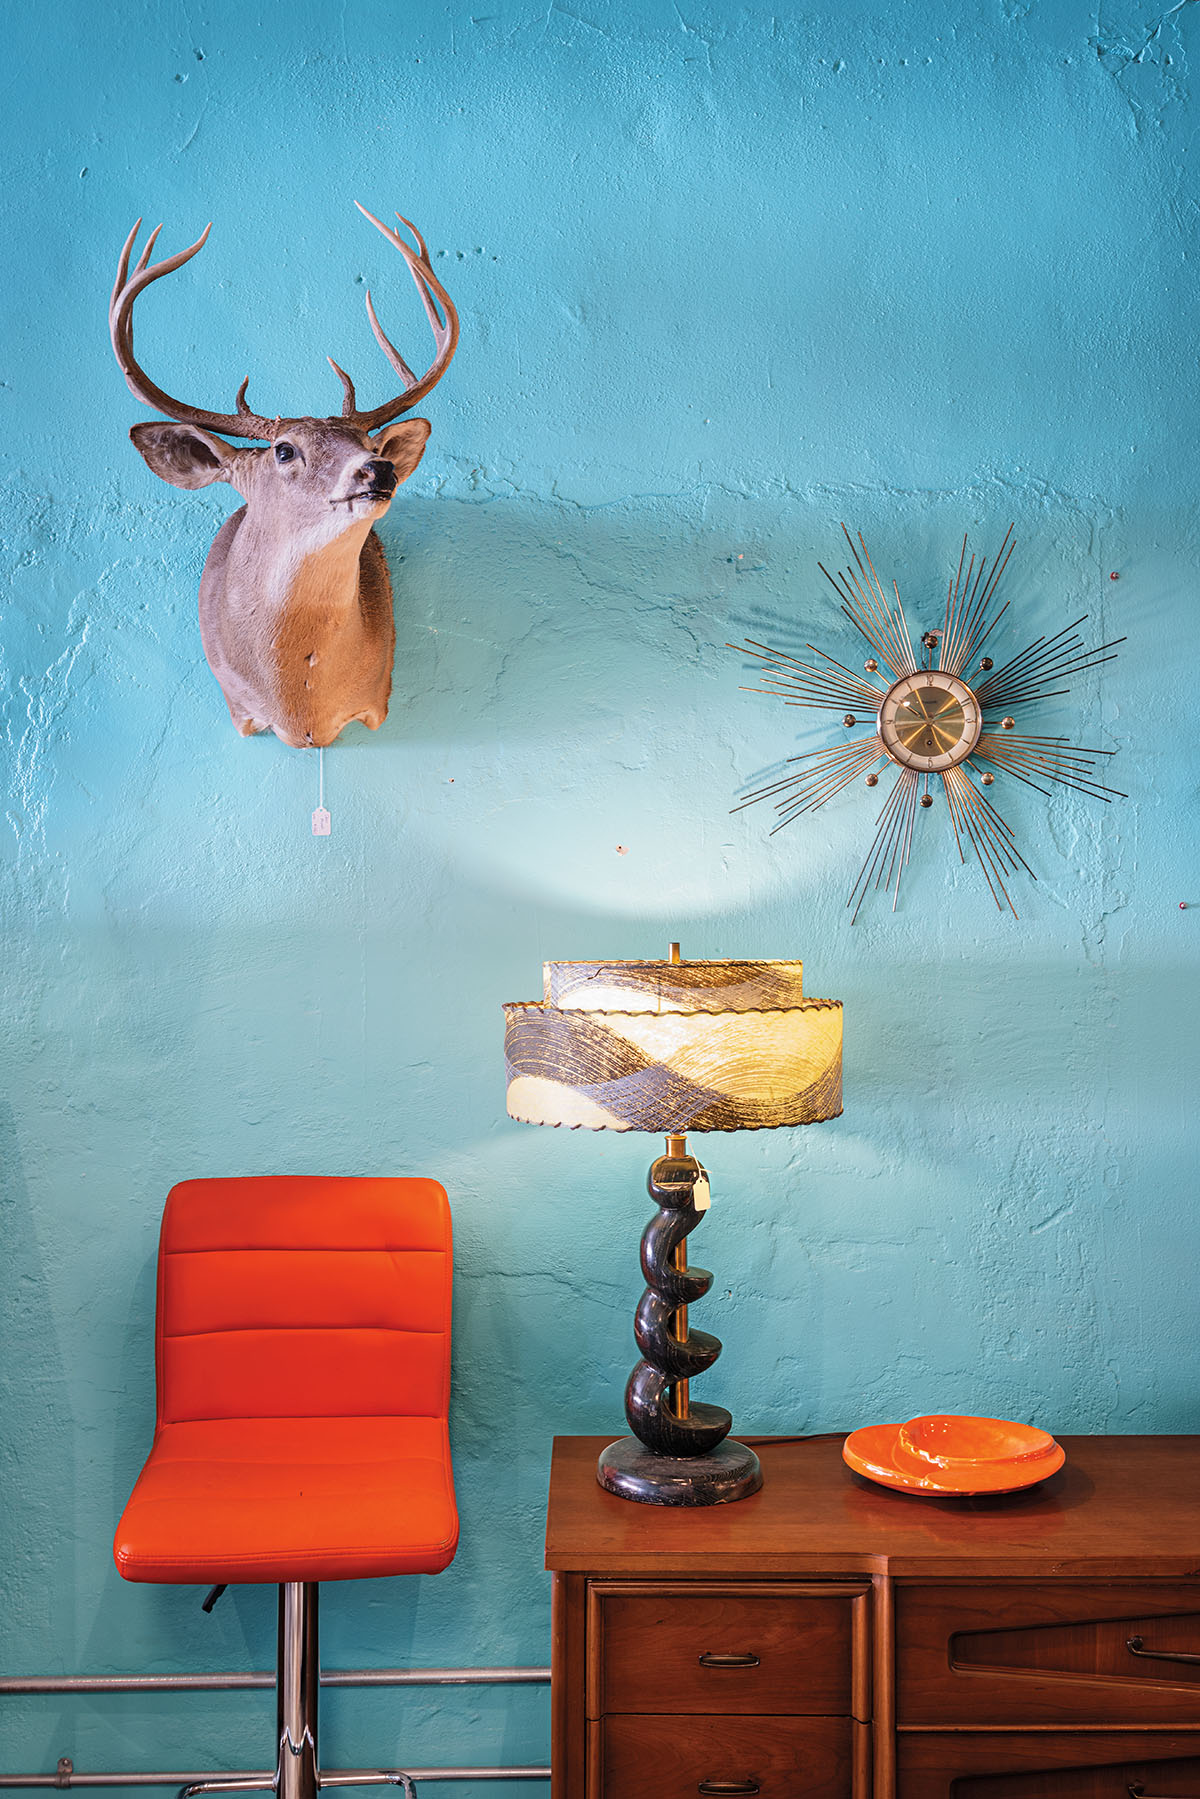 Taxedermined animals and wall art adorn a bright blue wall with a red chair